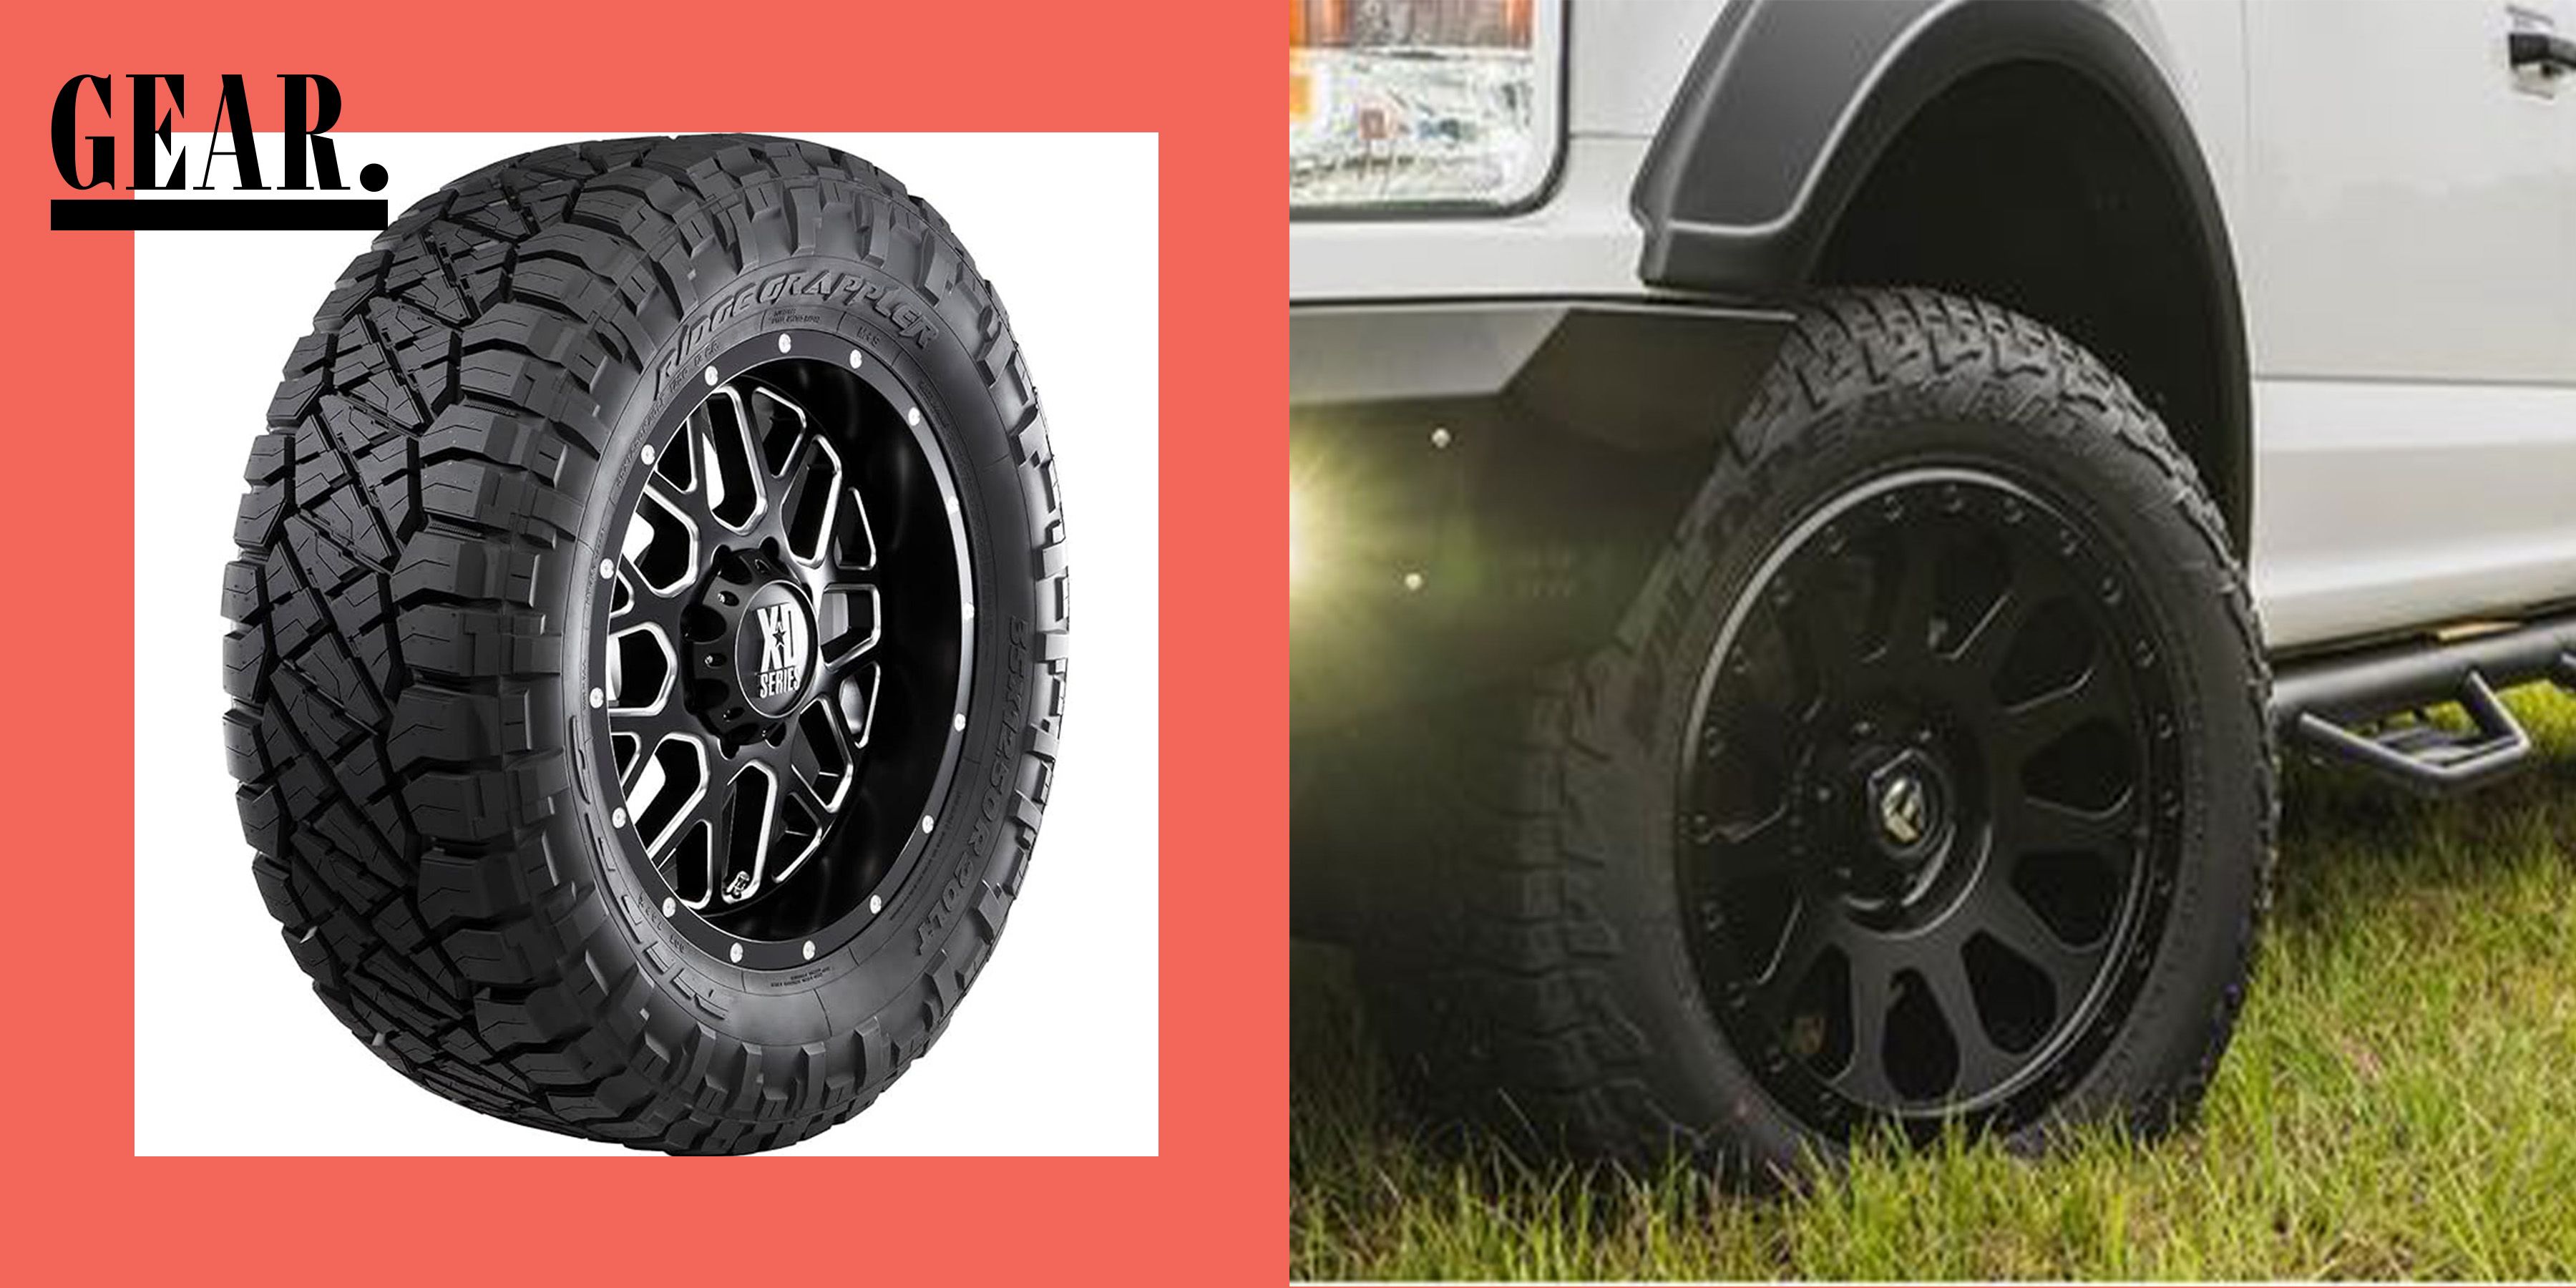 Truck Experts Pick the Best Truck Tires for You